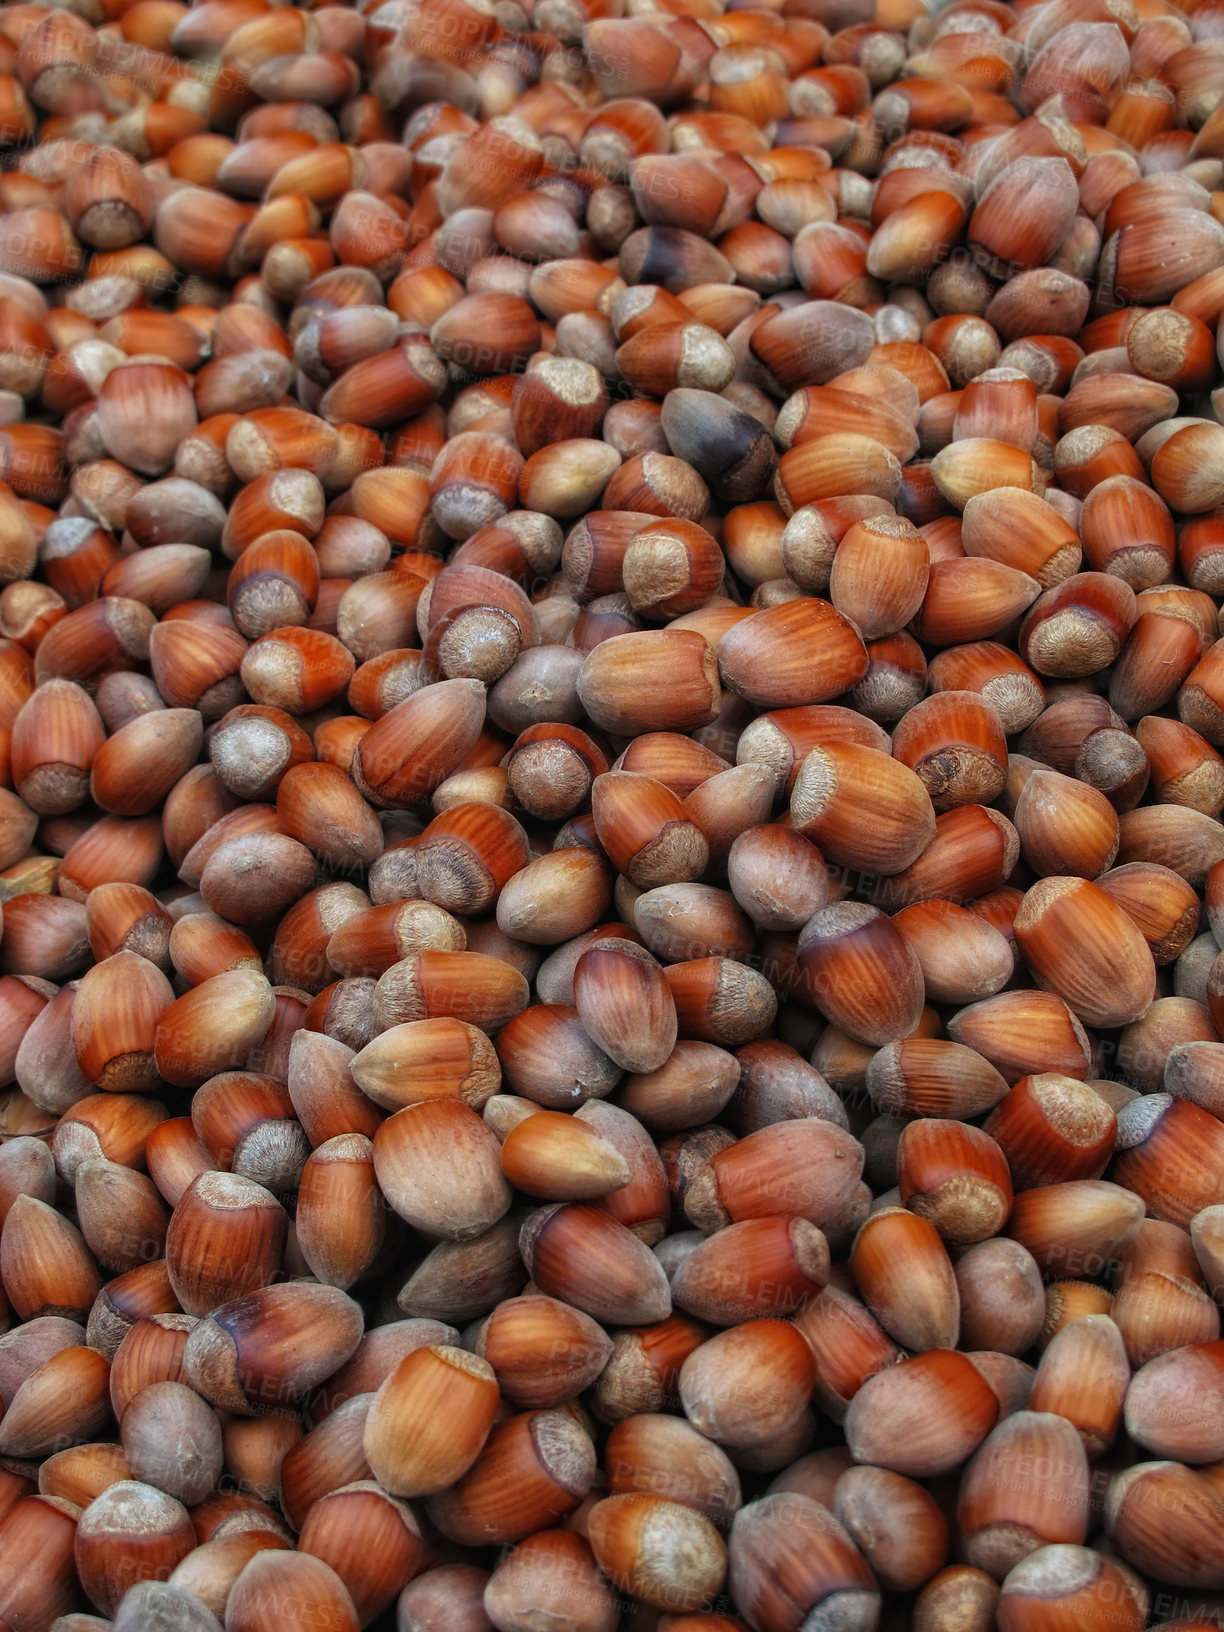 Buy stock photo Closeup of many acorns packed together. Masting taken place from large oak trees. Zoom in on many nuts laid out during mast crop season. Variety of shapes, sized and shades of brown. Nature wallpaper